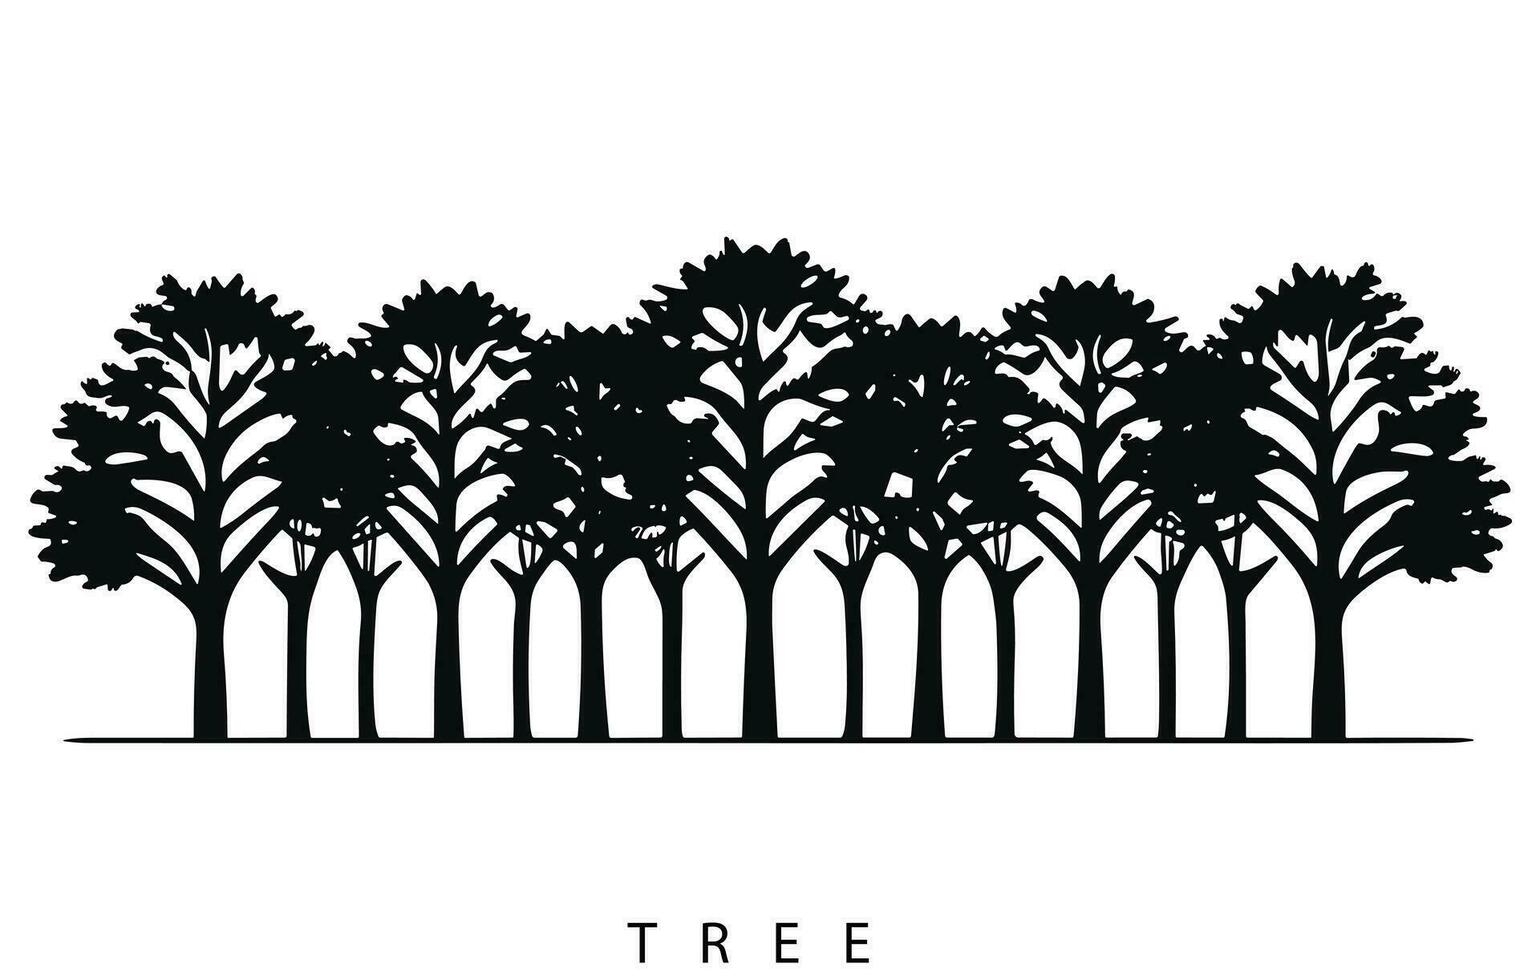 tree silhouettes Vector illustration, tree silhouette isolated on white background